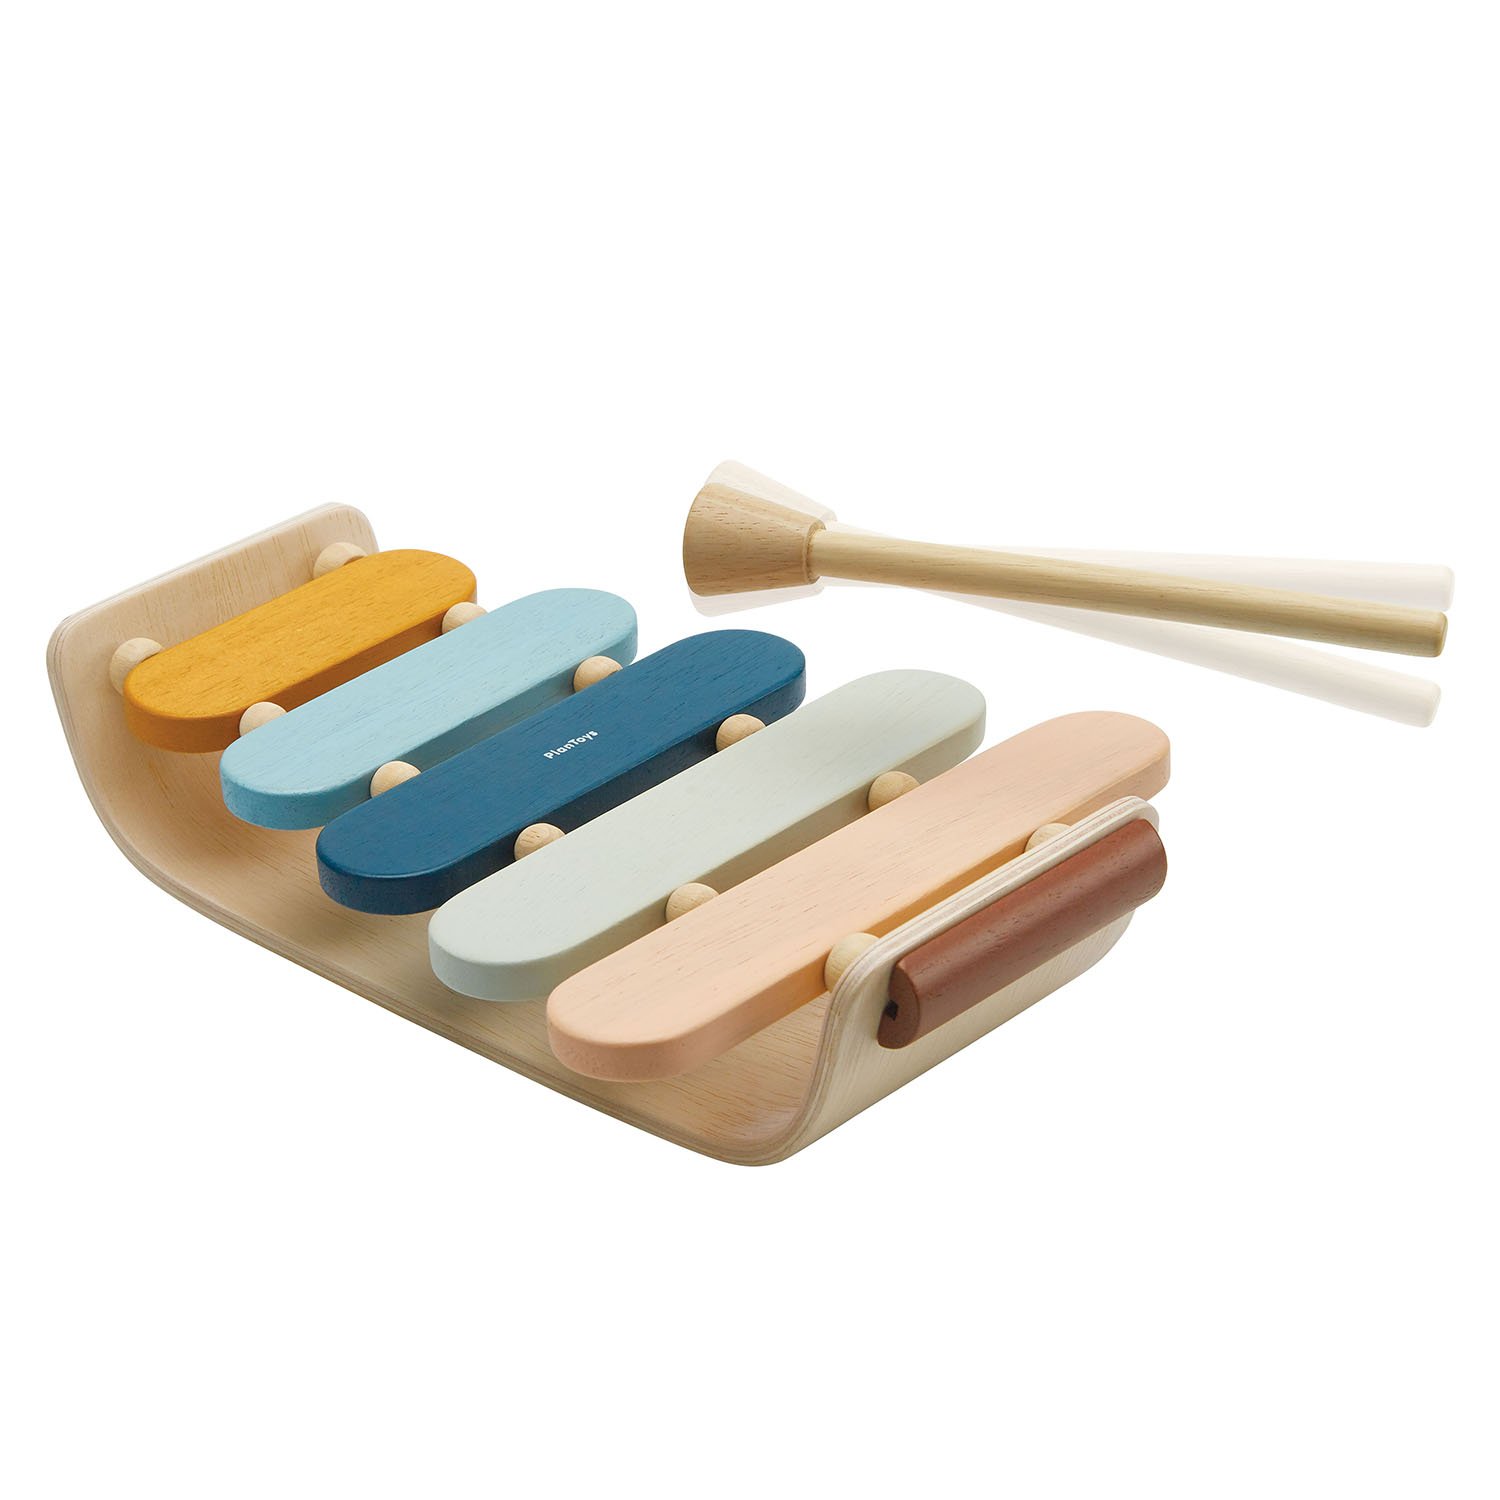 plan-toys-oval-xylophone-3